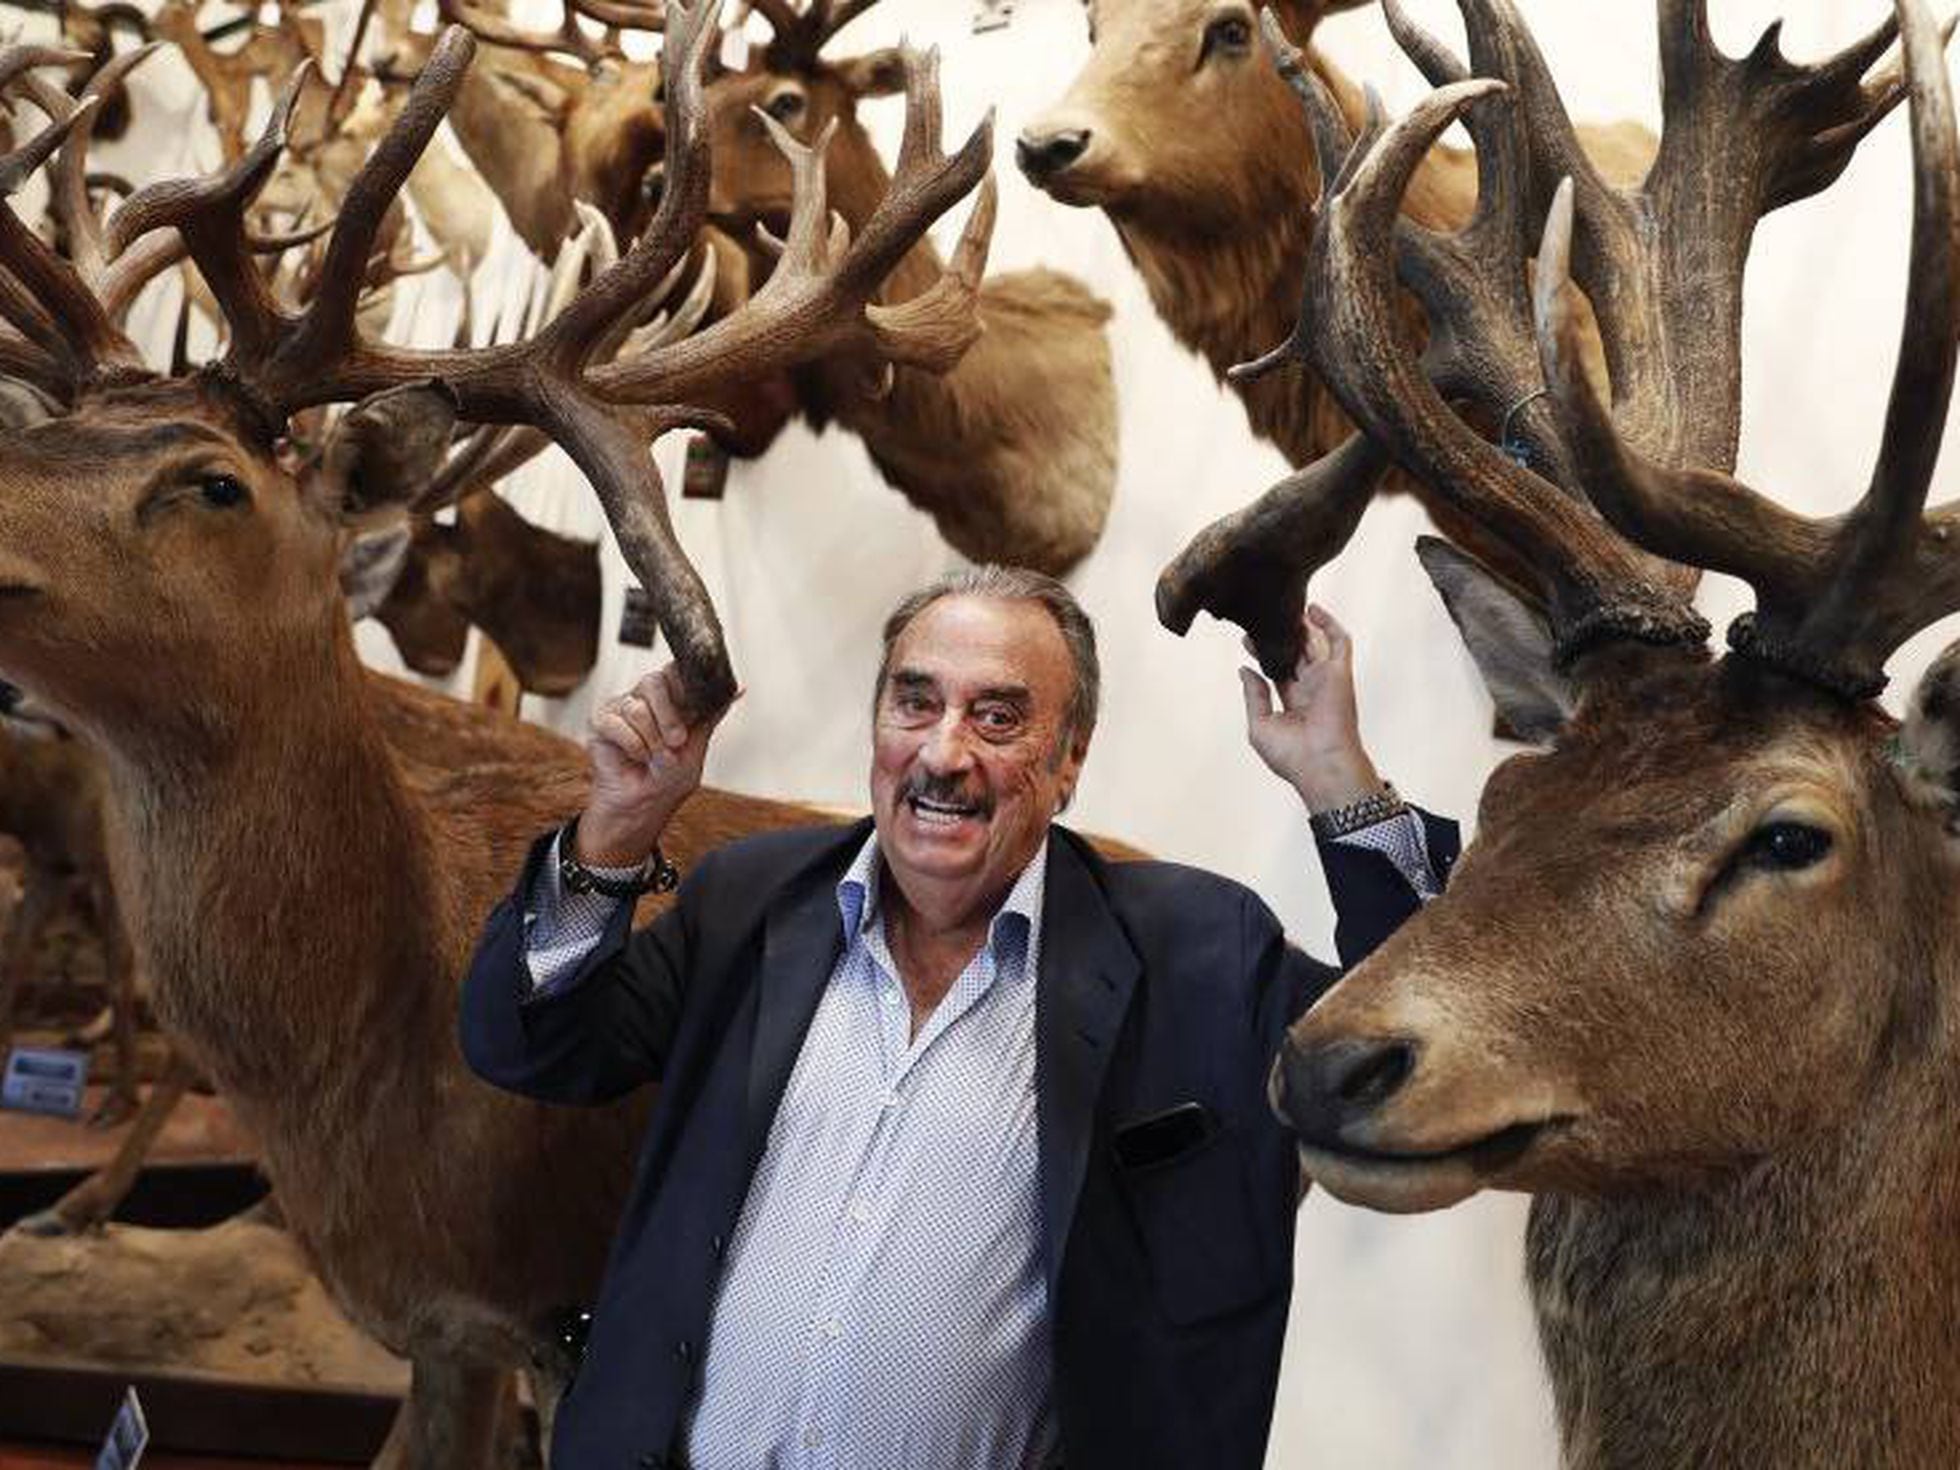 Spanish entrepreneur's dream of a hunting museum turns into a nightmare |  Society | EL PAÍS English Edition